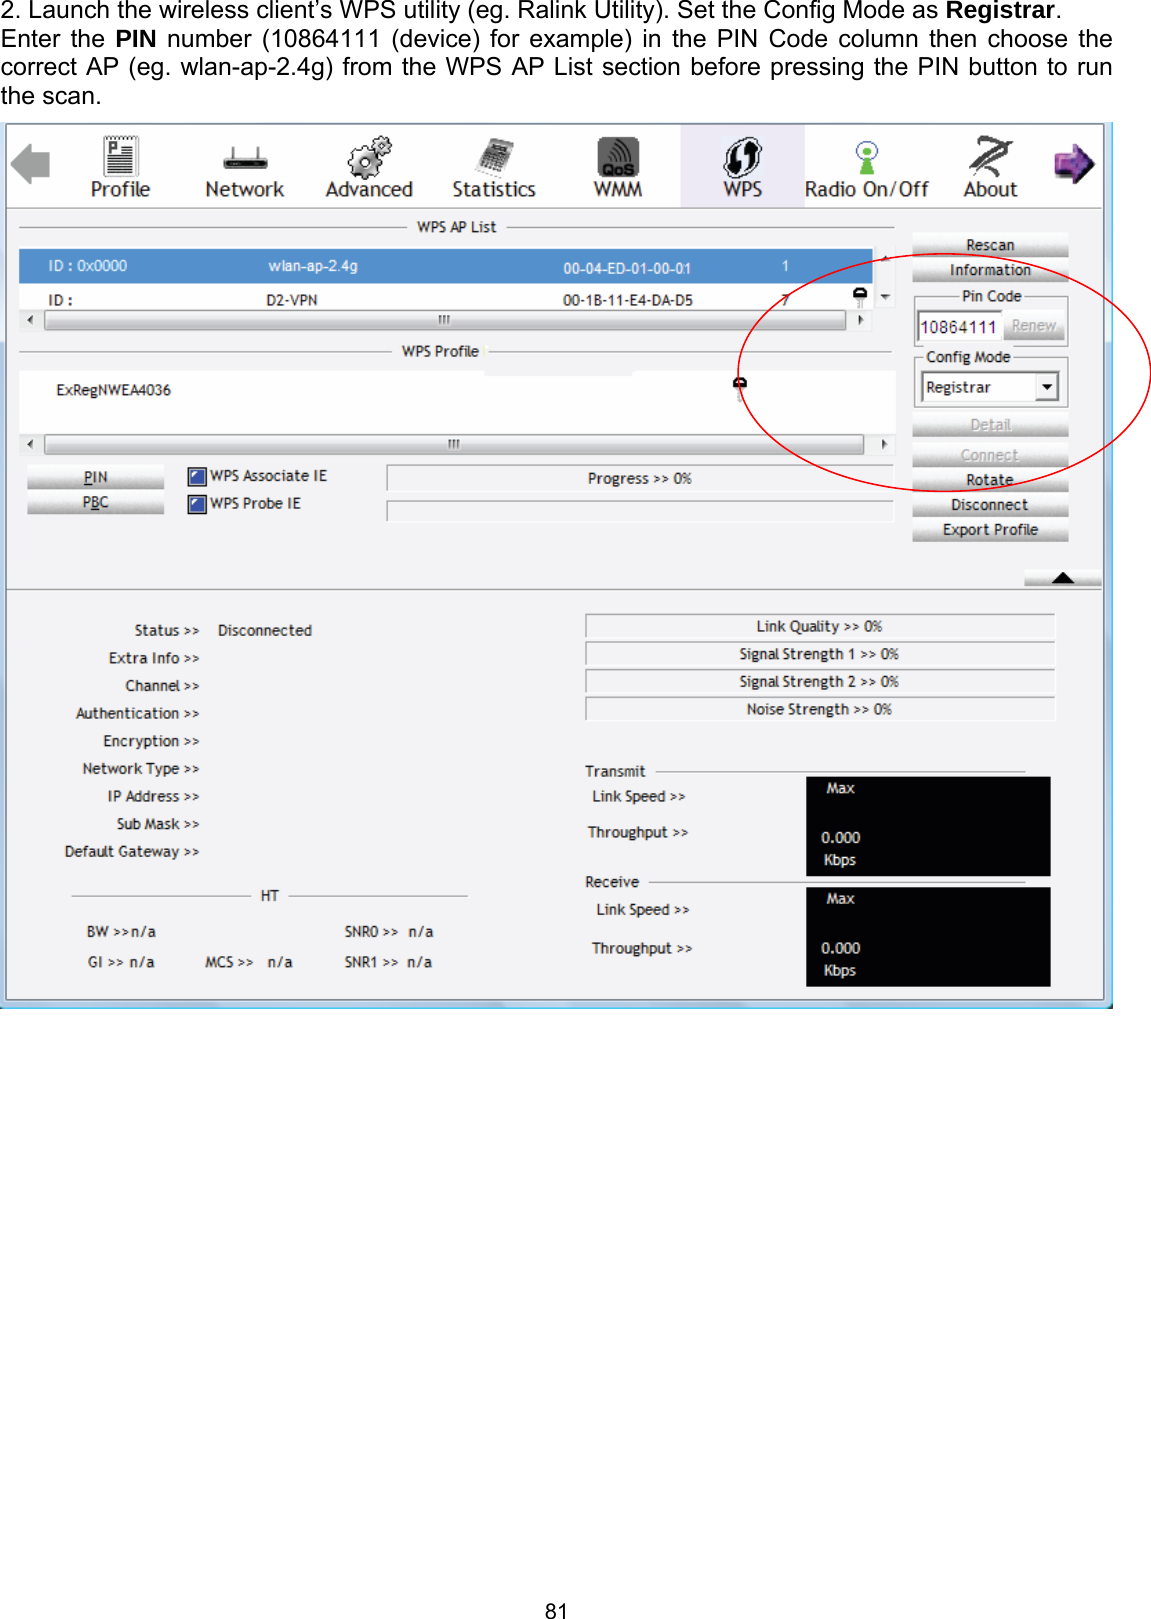  81  2. Launch the wireless client’s WPS utility (eg. Ralink Utility). Set the Config Mode as Registrar. Enter the PIN number (10864111 (device) for example) in the PIN Code column then choose the correct AP (eg. wlan-ap-2.4g) from the WPS AP List section before pressing the PIN button to run the scan.               